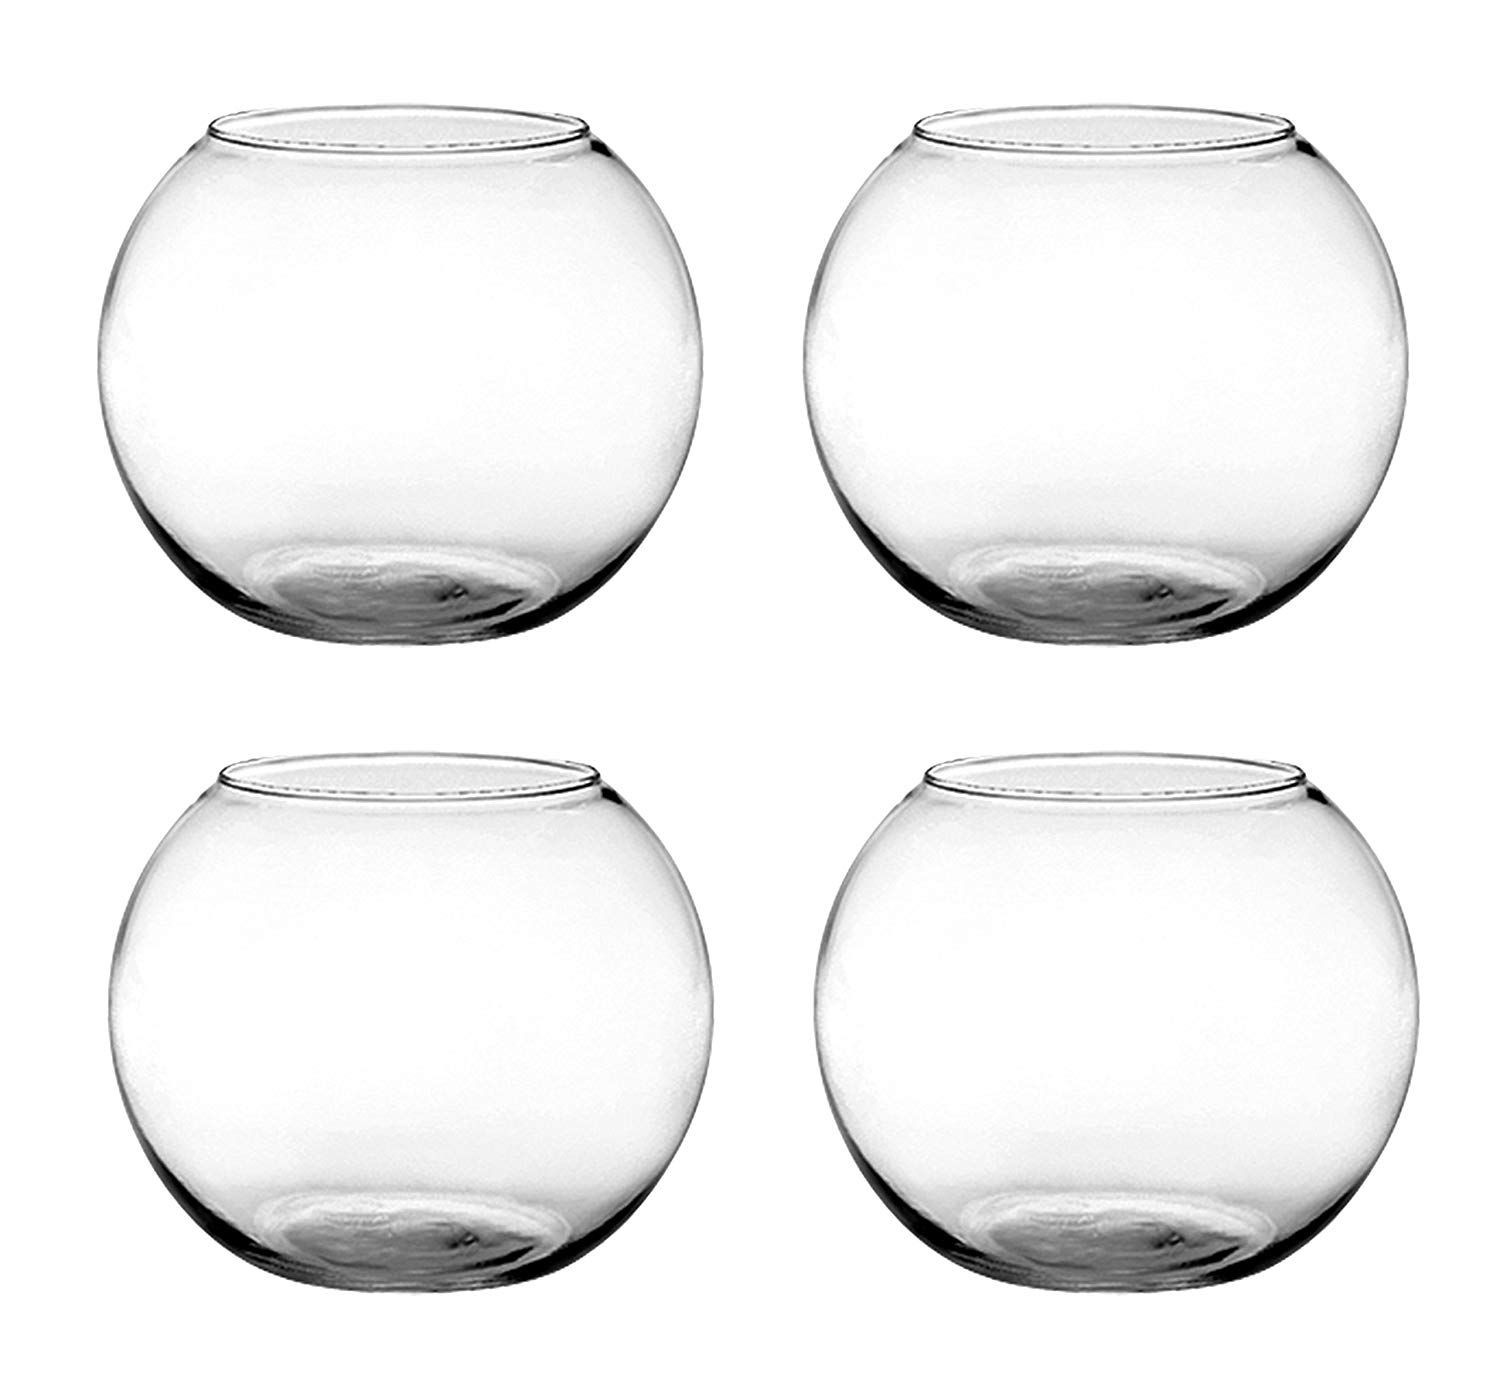 28 Stylish Decorative Vases Amazon 2024 free download decorative vases amazon of 32 wide mouth vase the weekly world throughout amazon syndicate sales 6 rose bowl clear planters garden